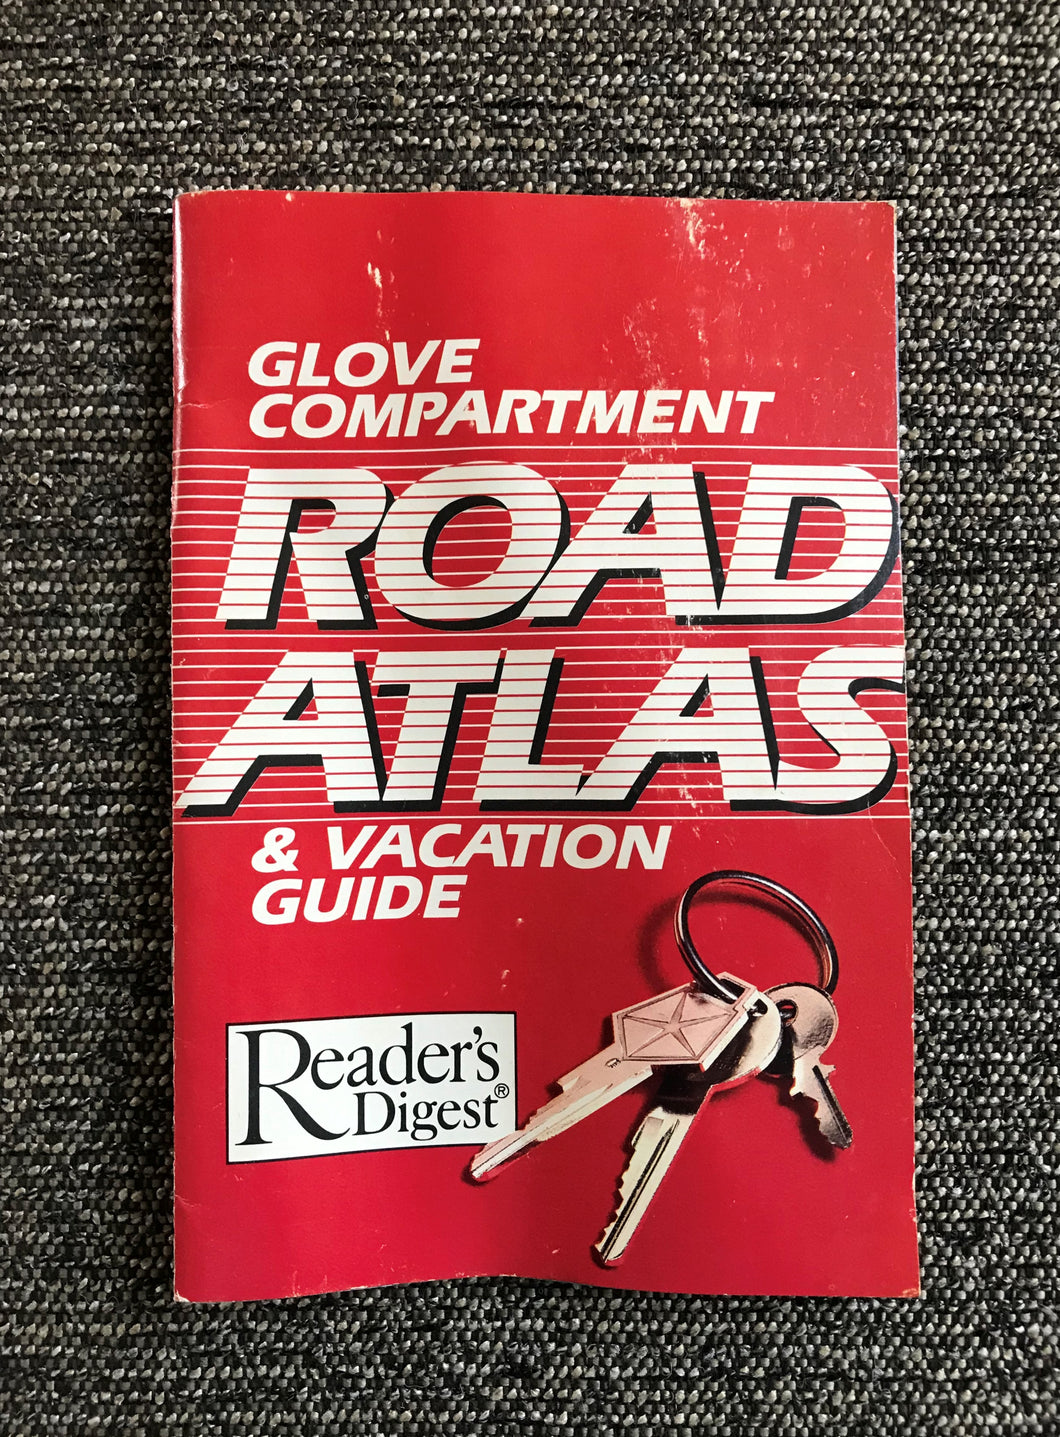 VINTAGE 1980S READER'S DIGEST GLOVE COMPARTMENT ROAD ATLAS & VACATION GUIDE